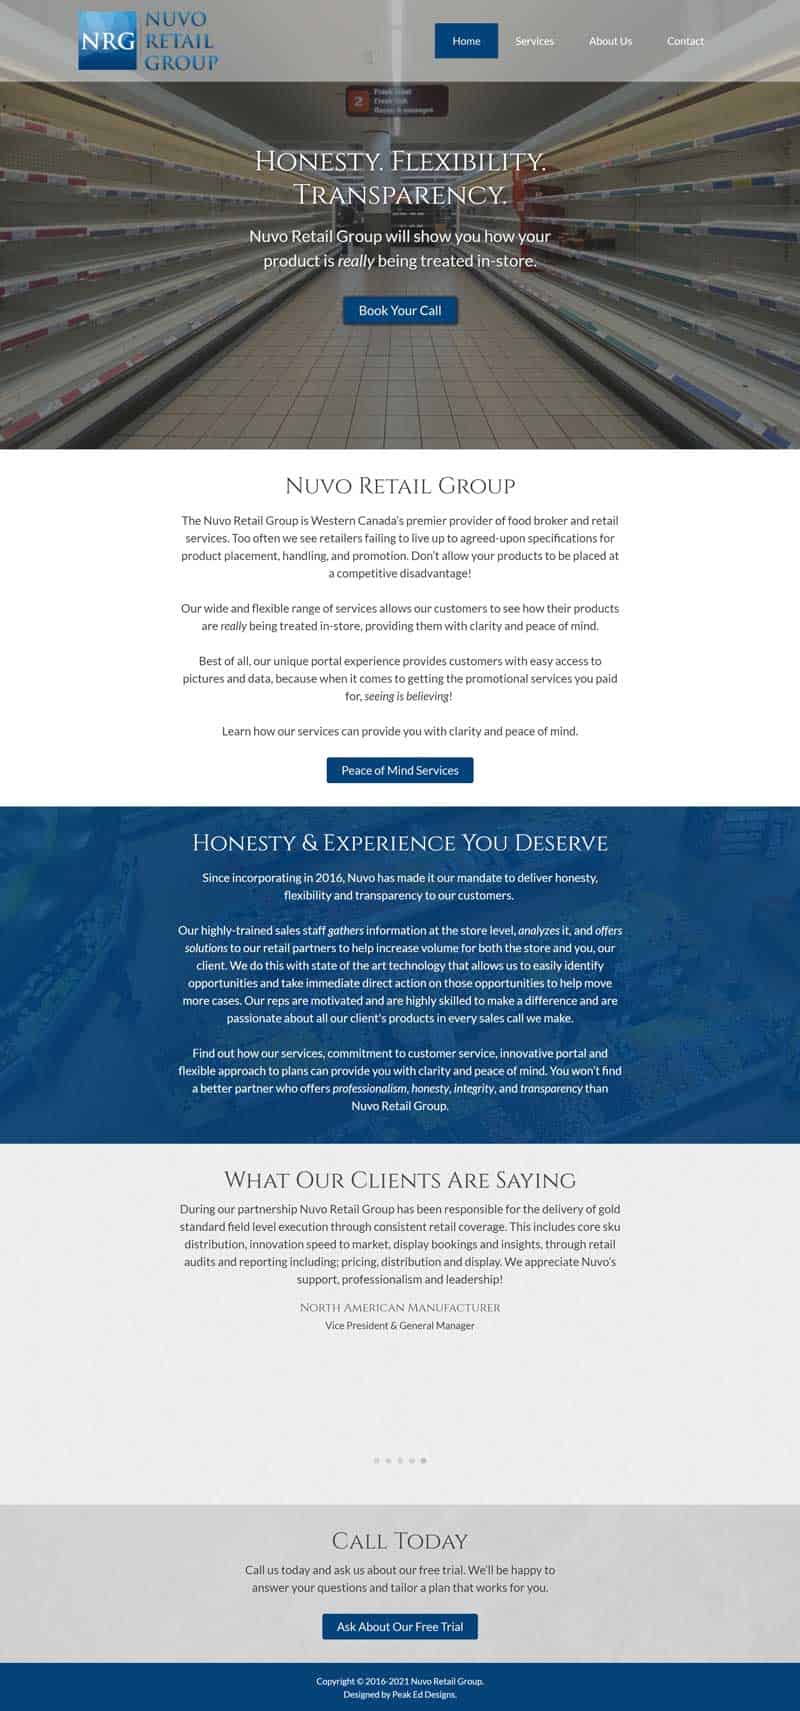 Nuvo Retail Group home page after the redesign